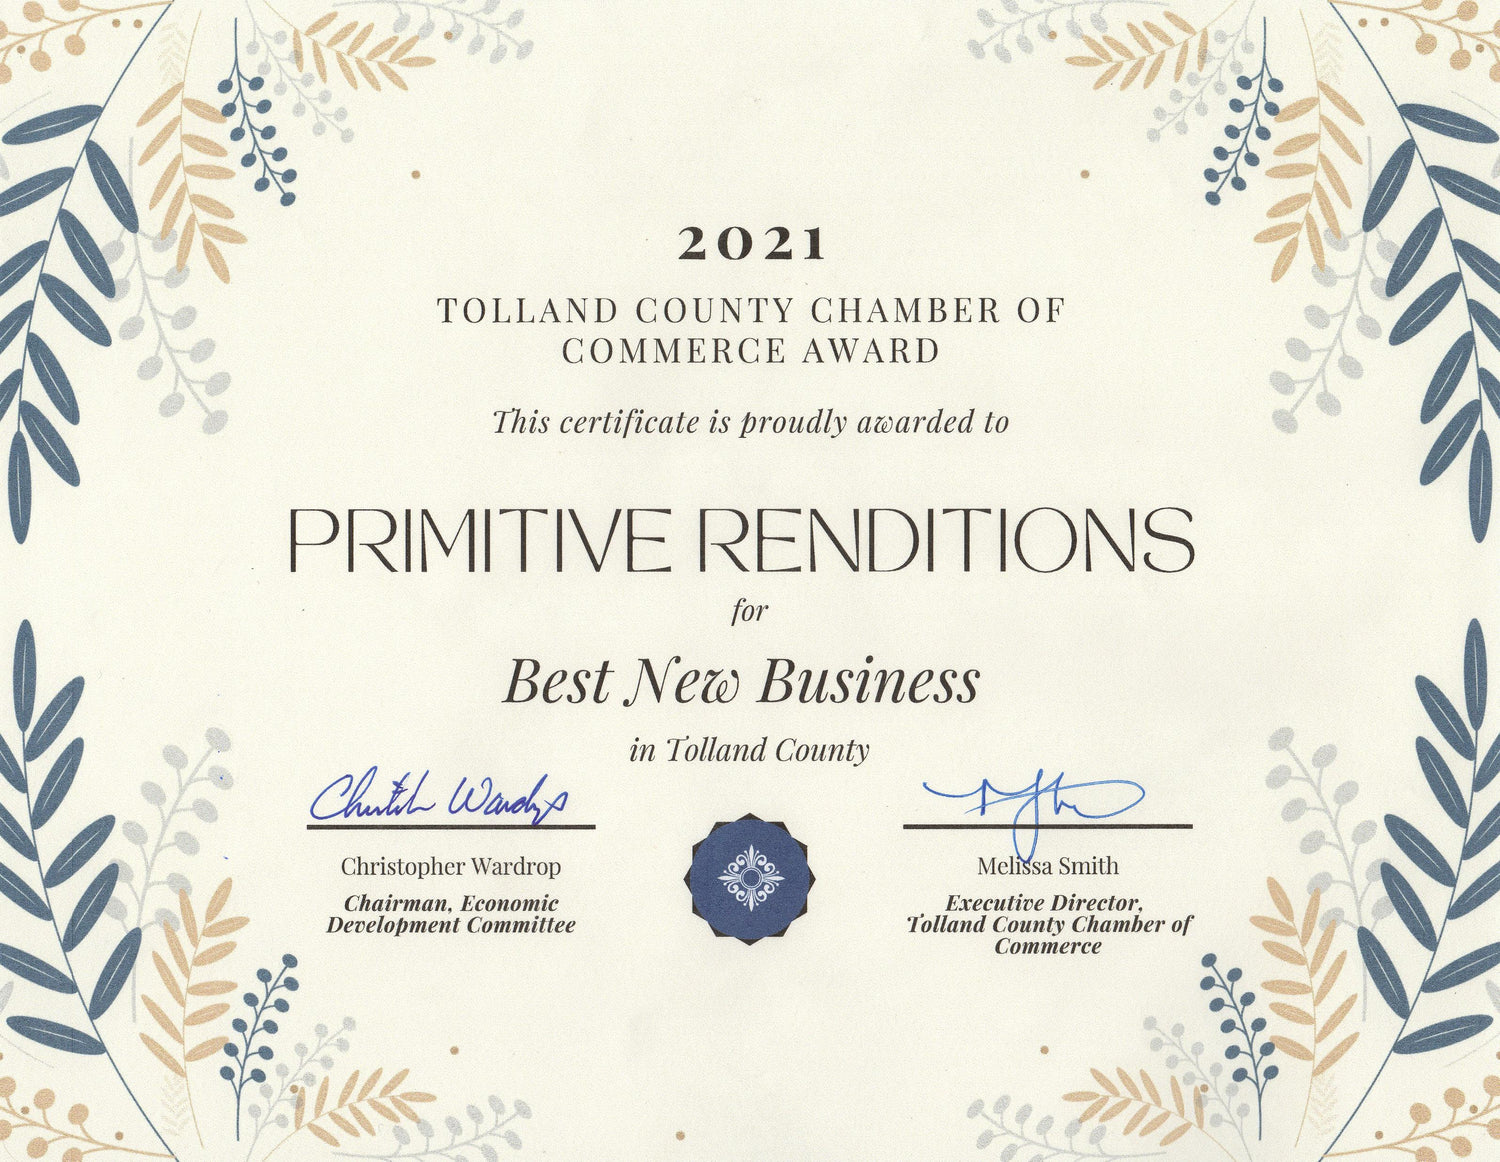 Thank You for voting Primitive Renditions as the Best New Business in Tolland County!!